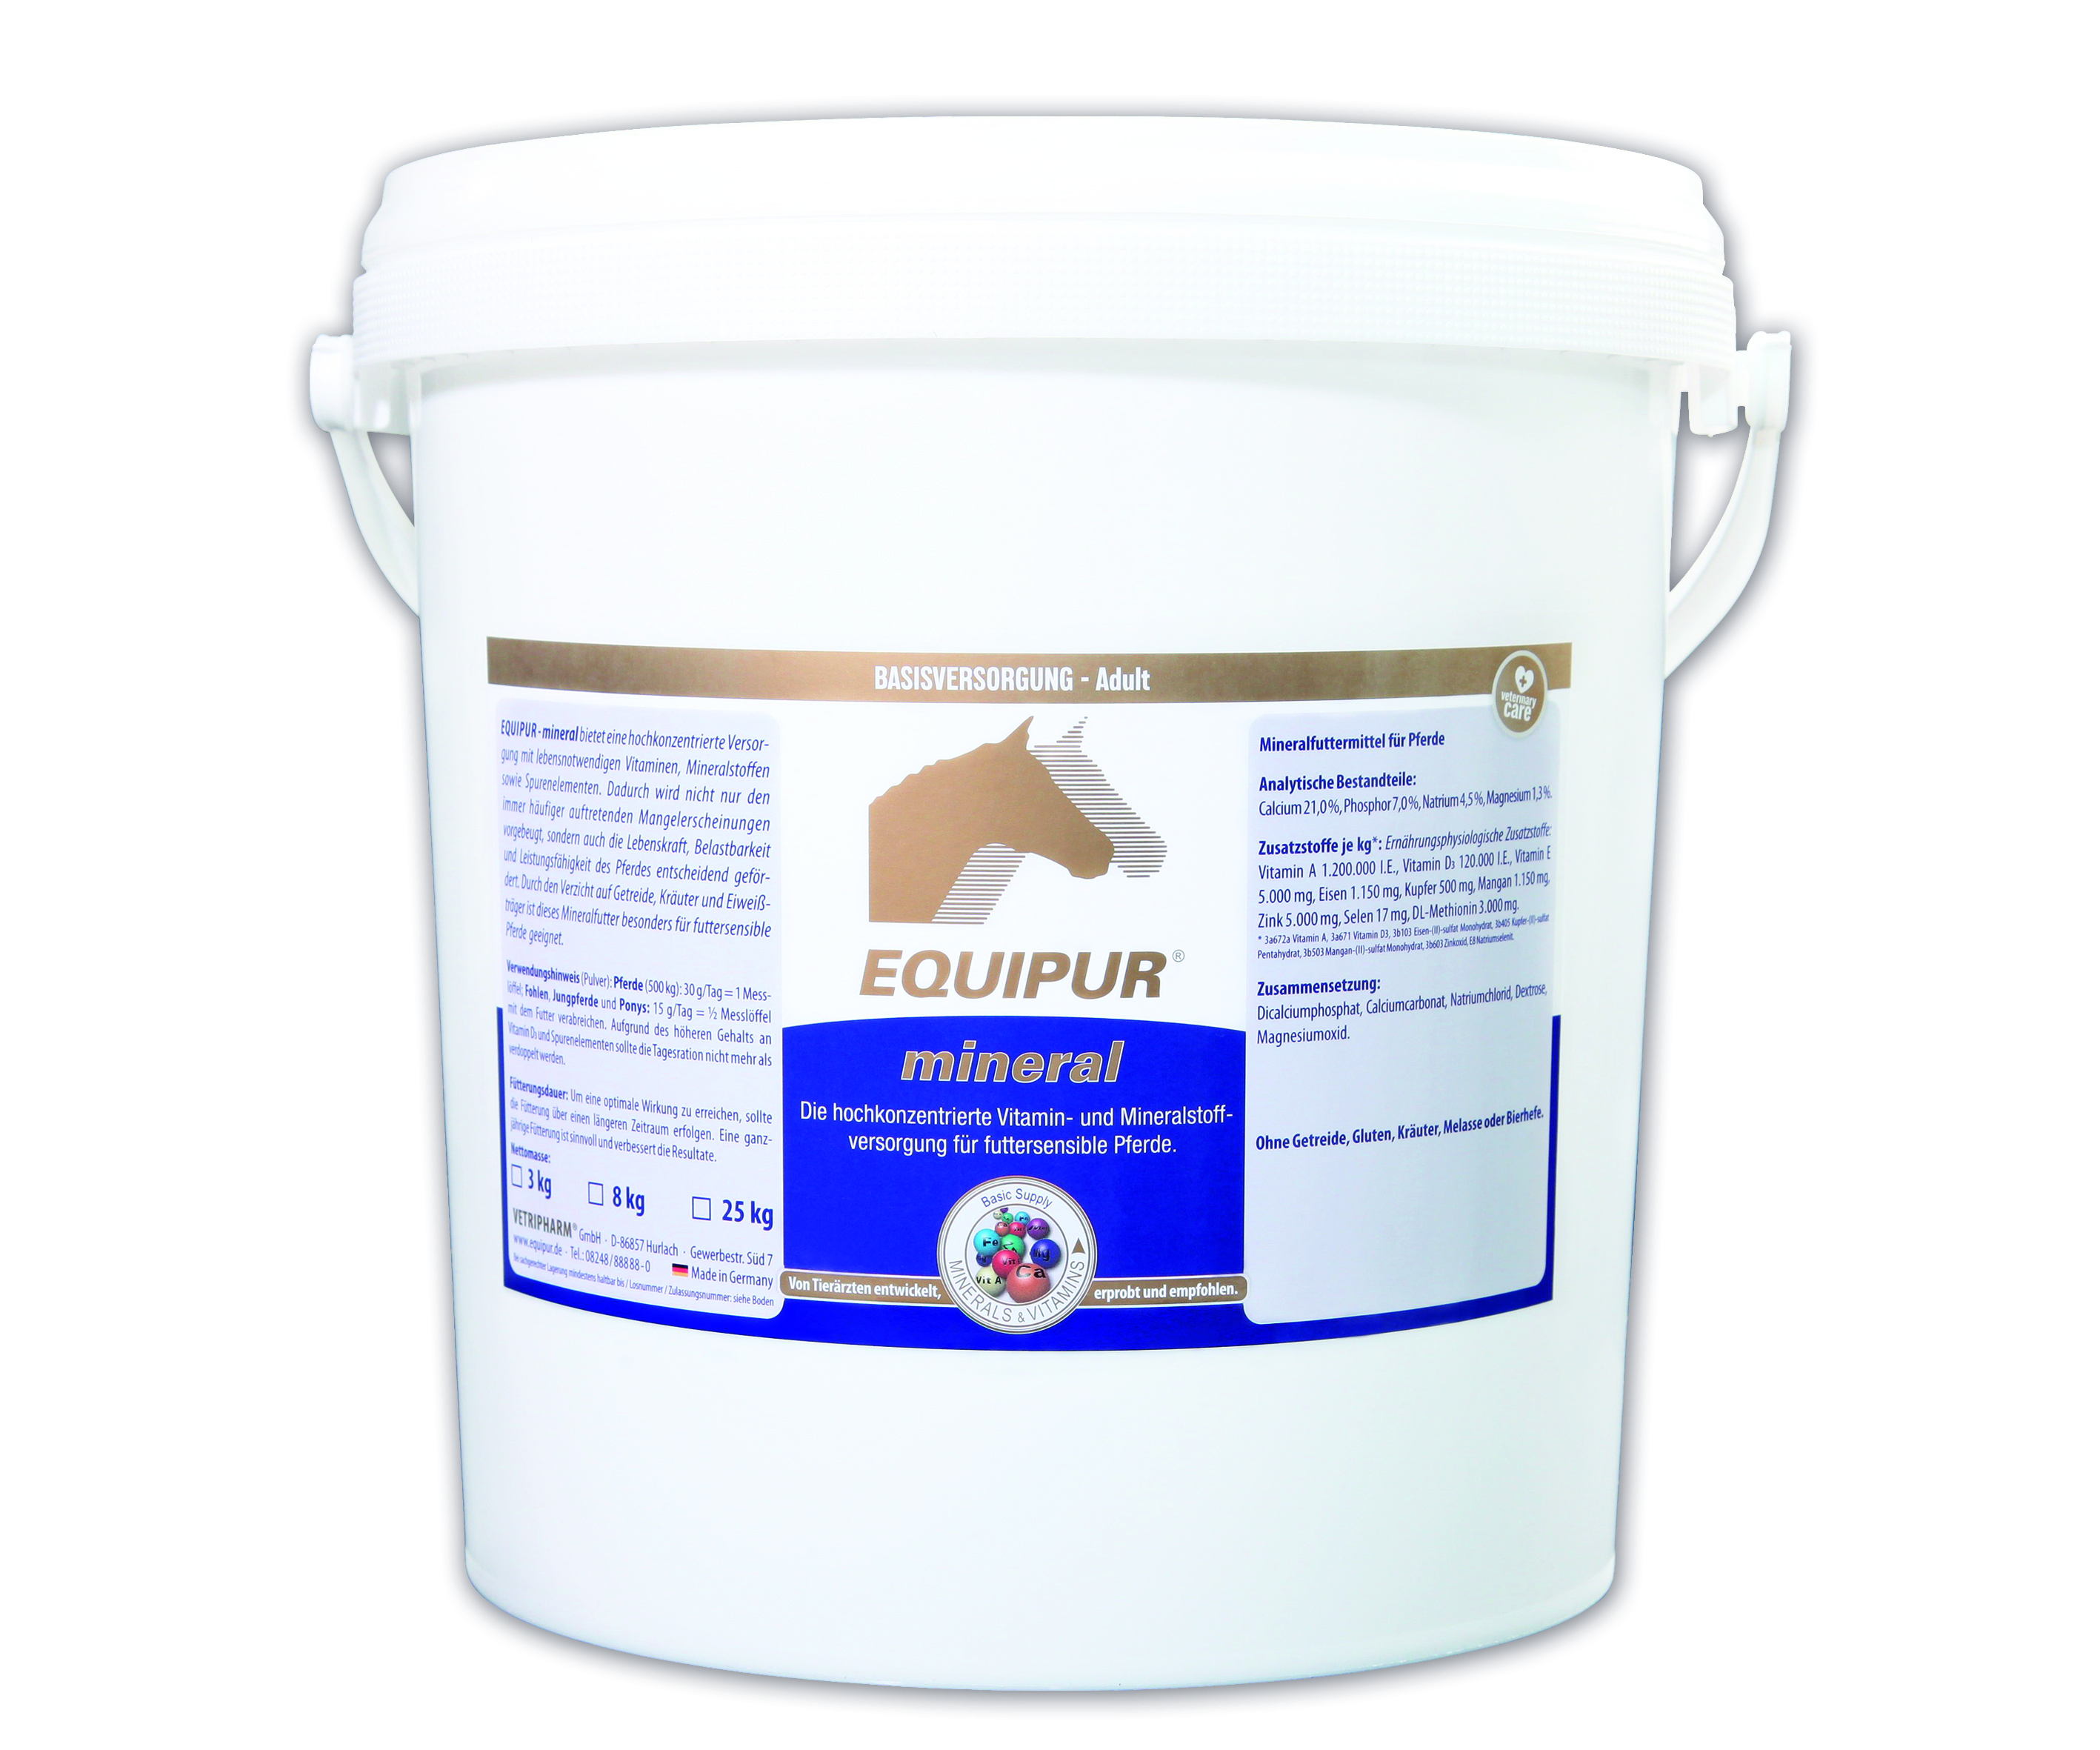 EQUIPUR® mineral